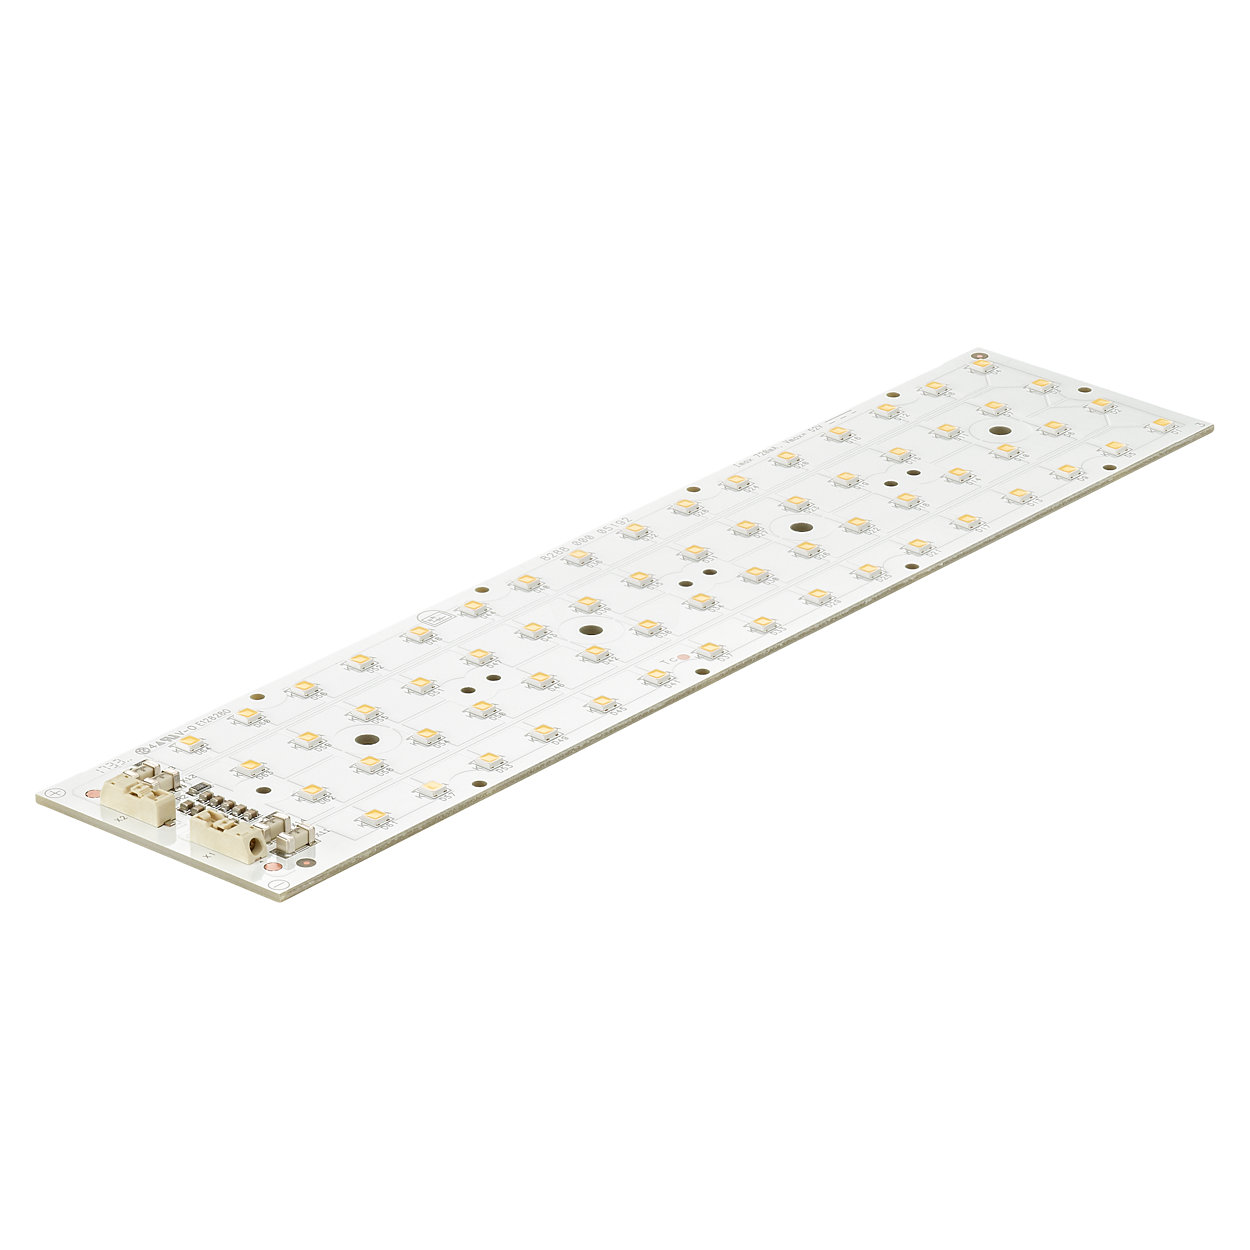 Flexible LED system approach for outdoor and industry LED lighting